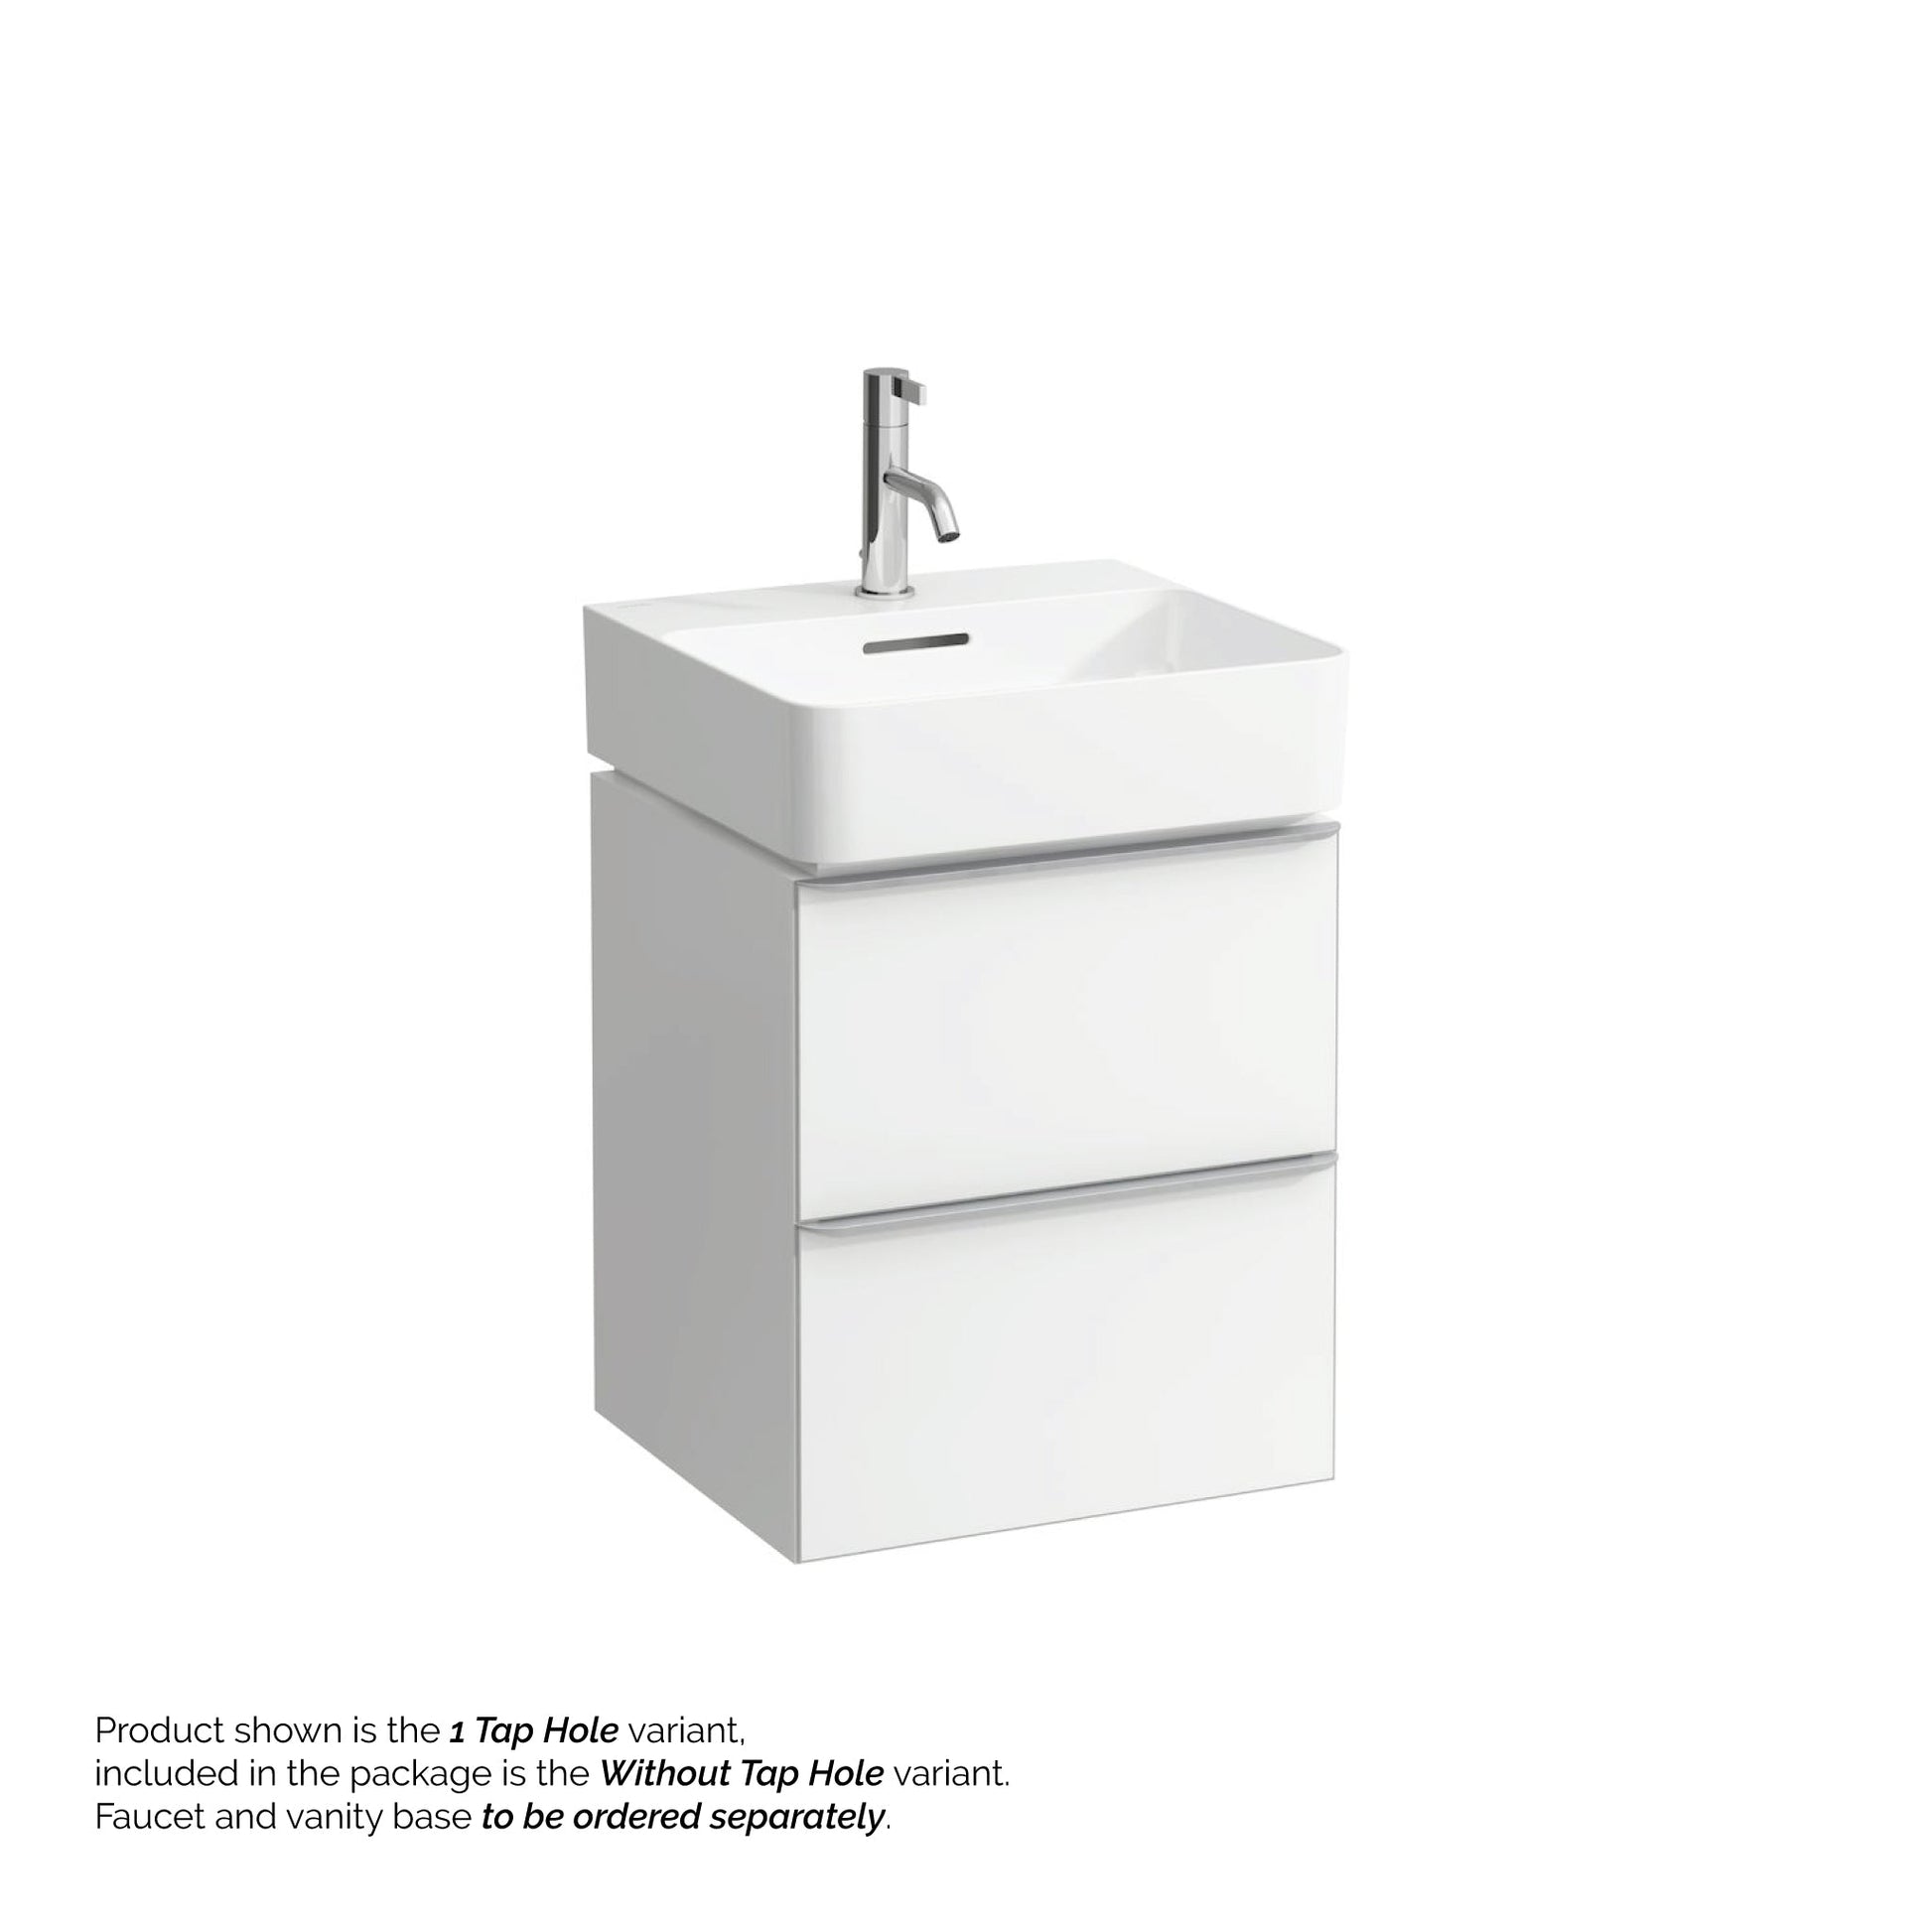 Laufen Val 18" x 17" Rectangular Matte White Ceramic Wall-Mounted Bathroom Sink Without Faucet Hole